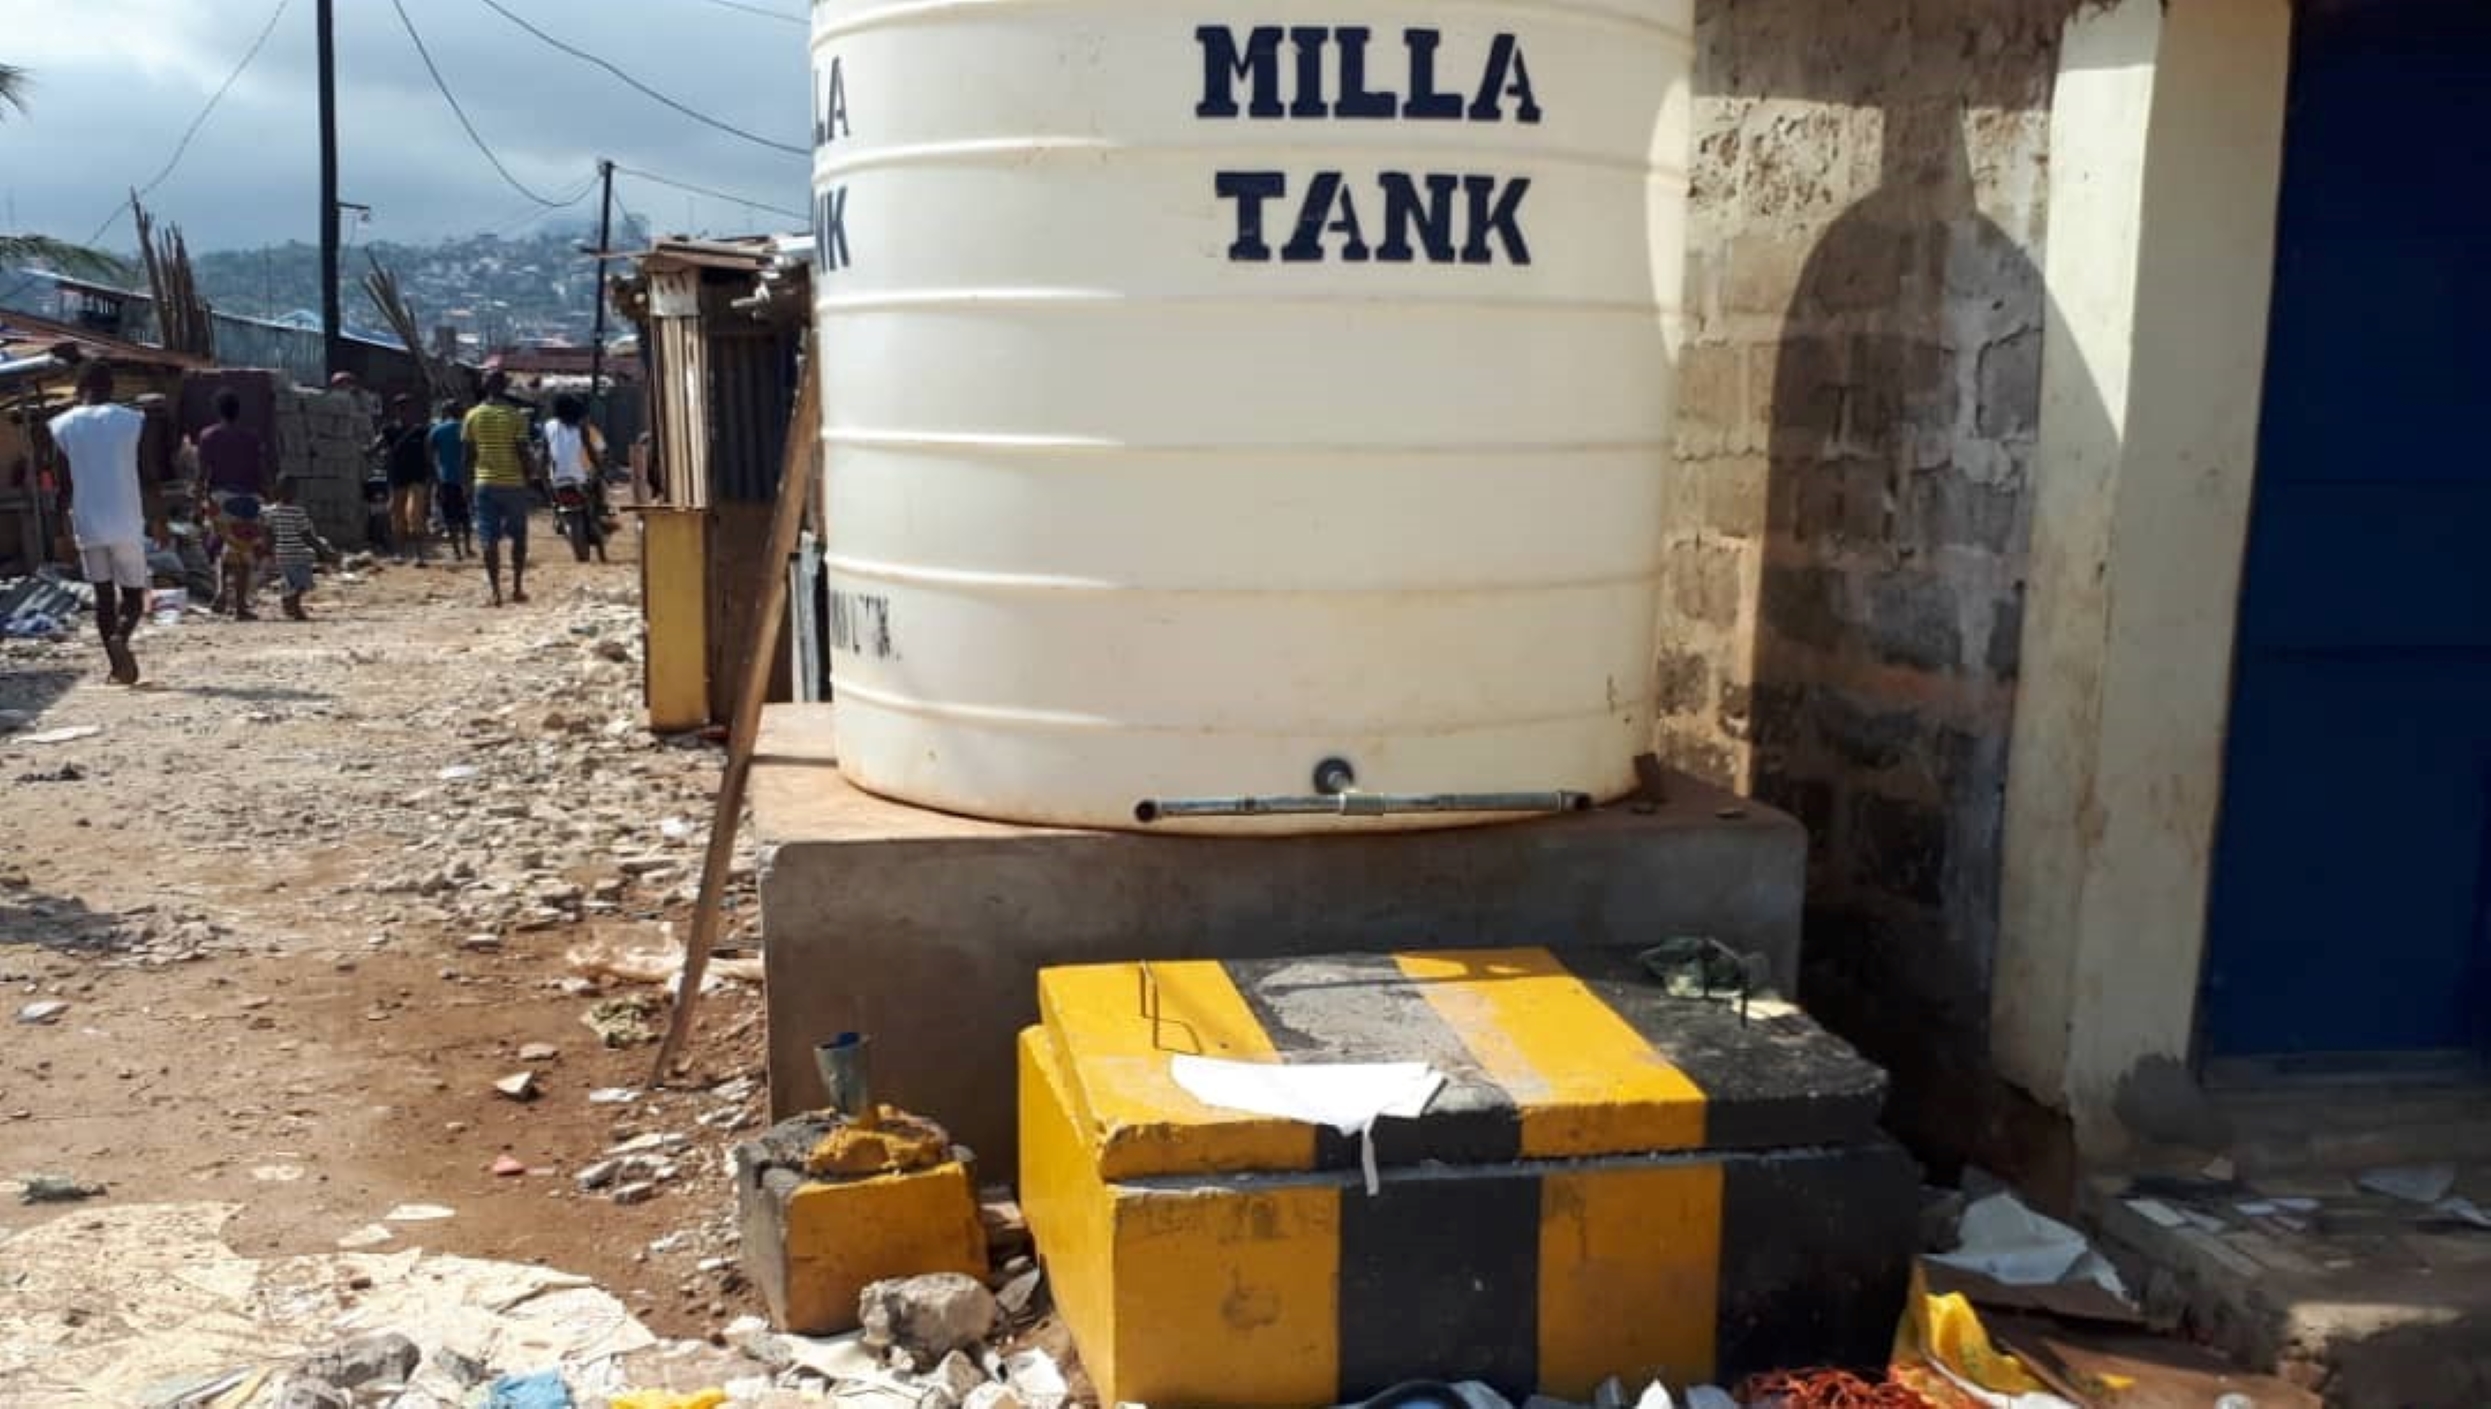 Milla water tank provides water in low-income area